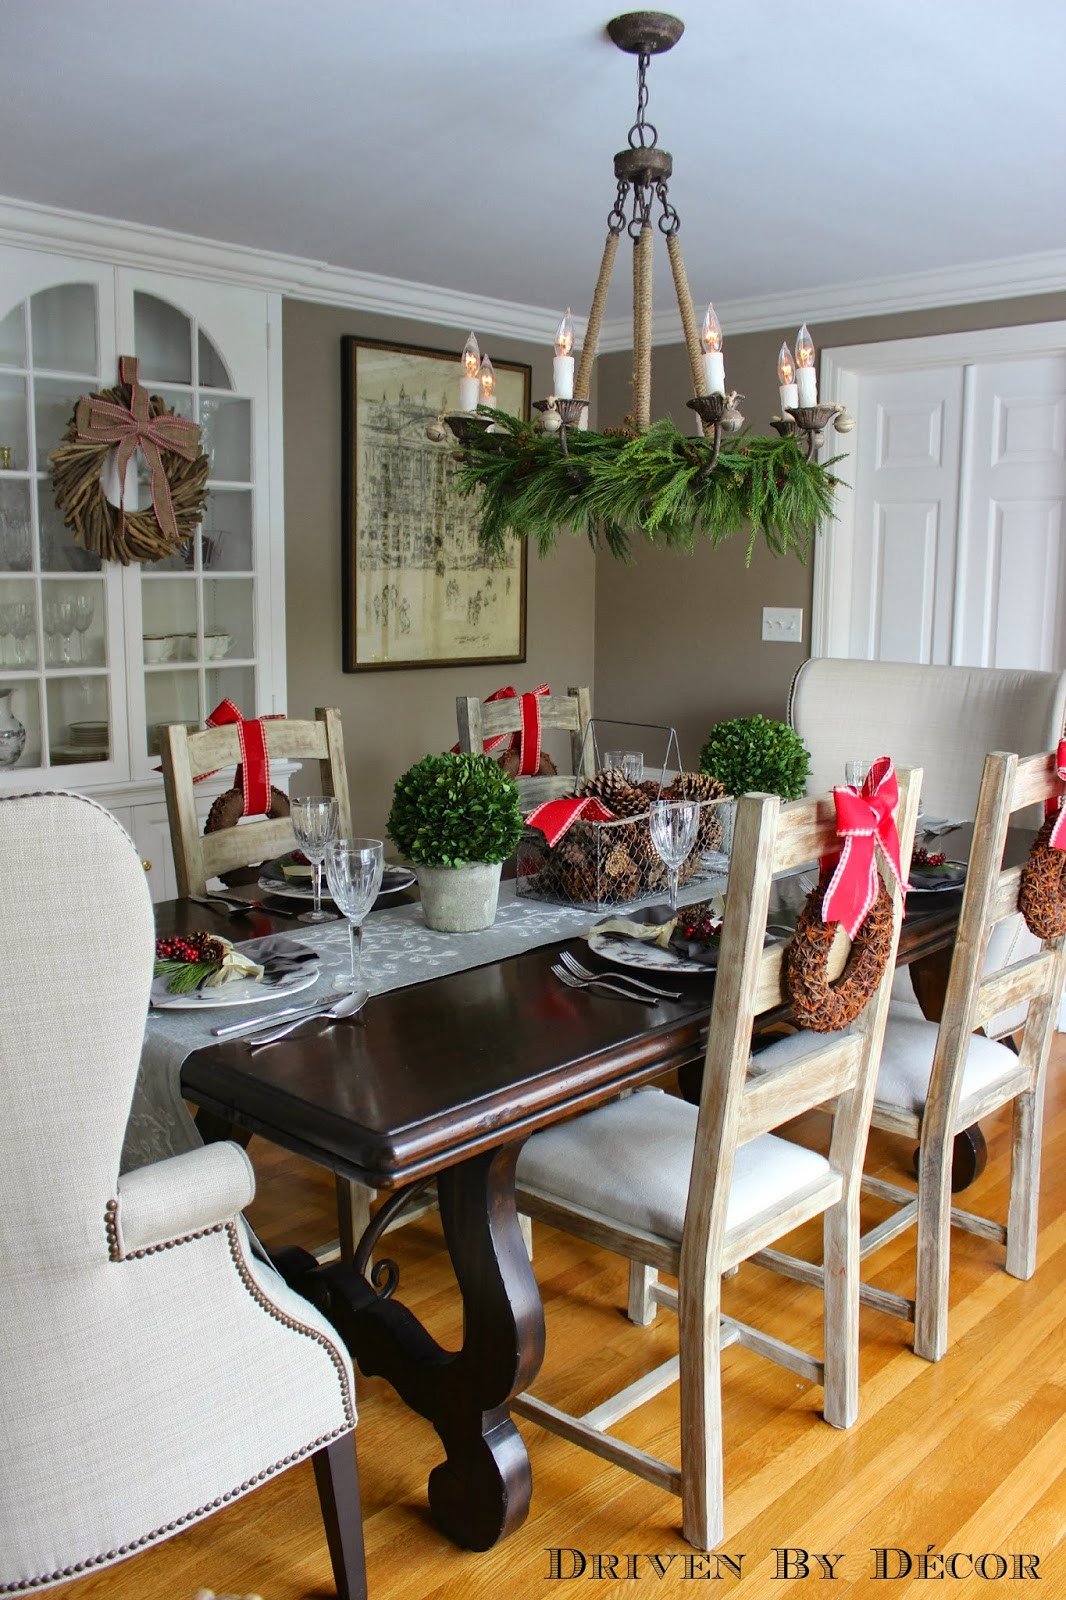 Dining Room Christmas Decorations
 Our Christmas Home Tour